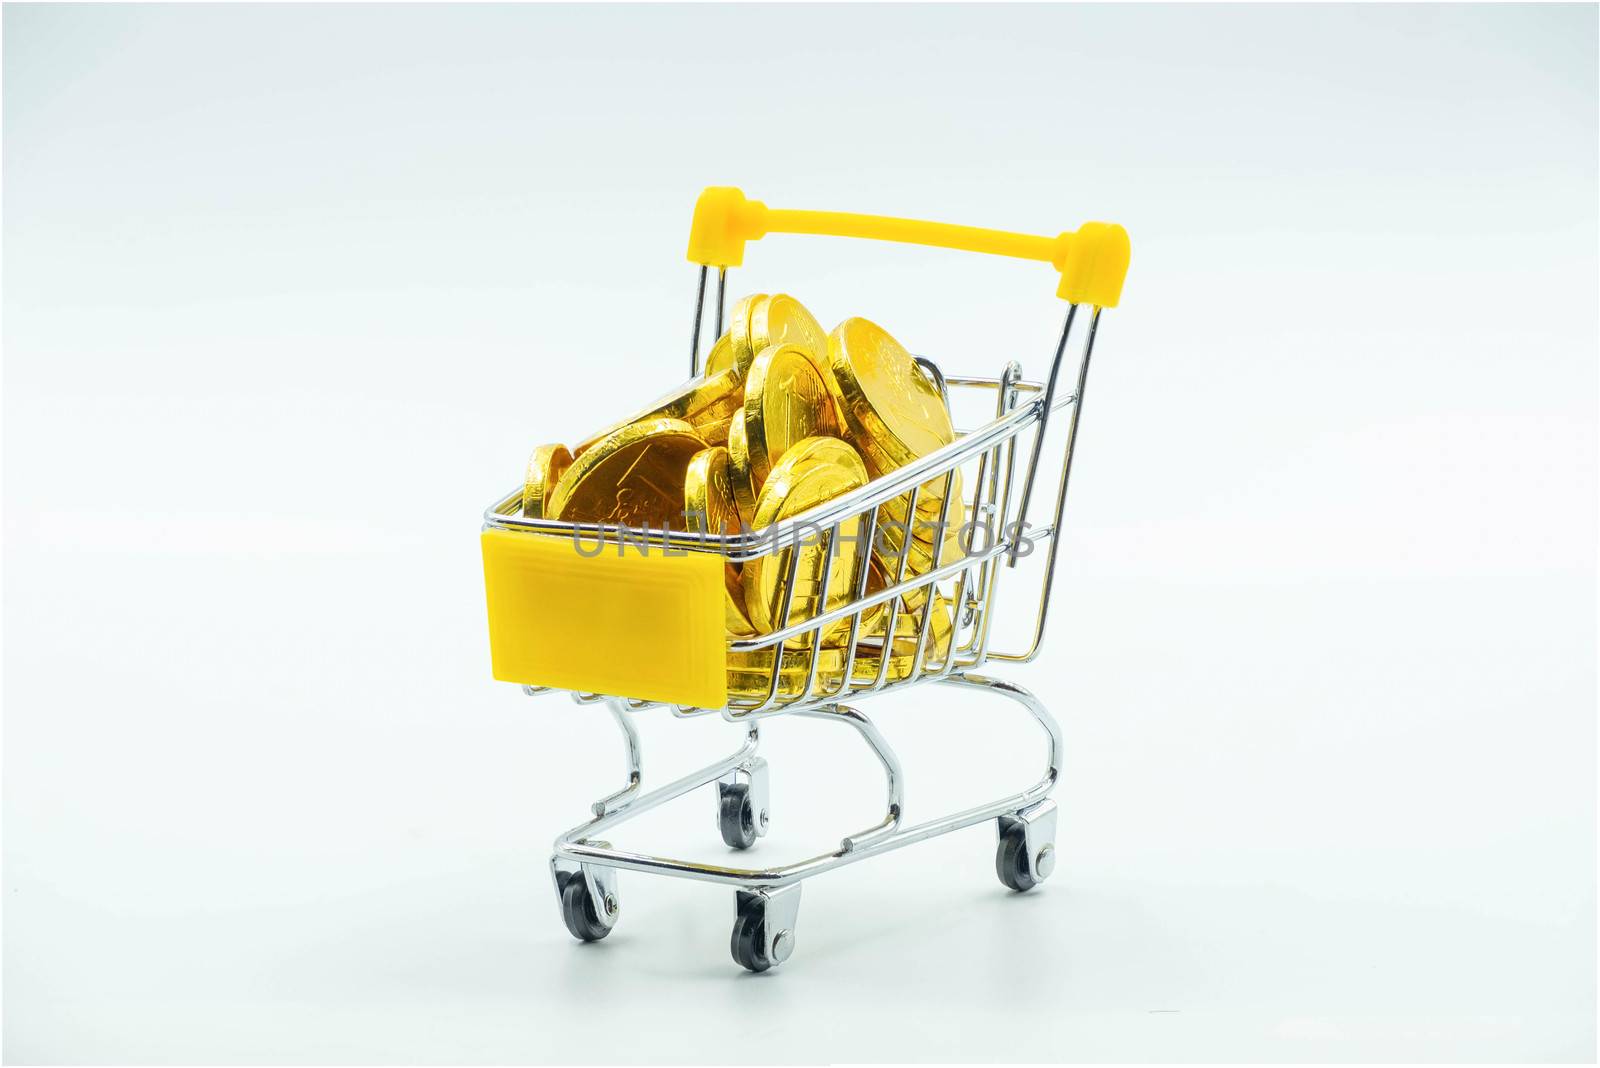 The Shopping cart and Gold coins Isolated on White background